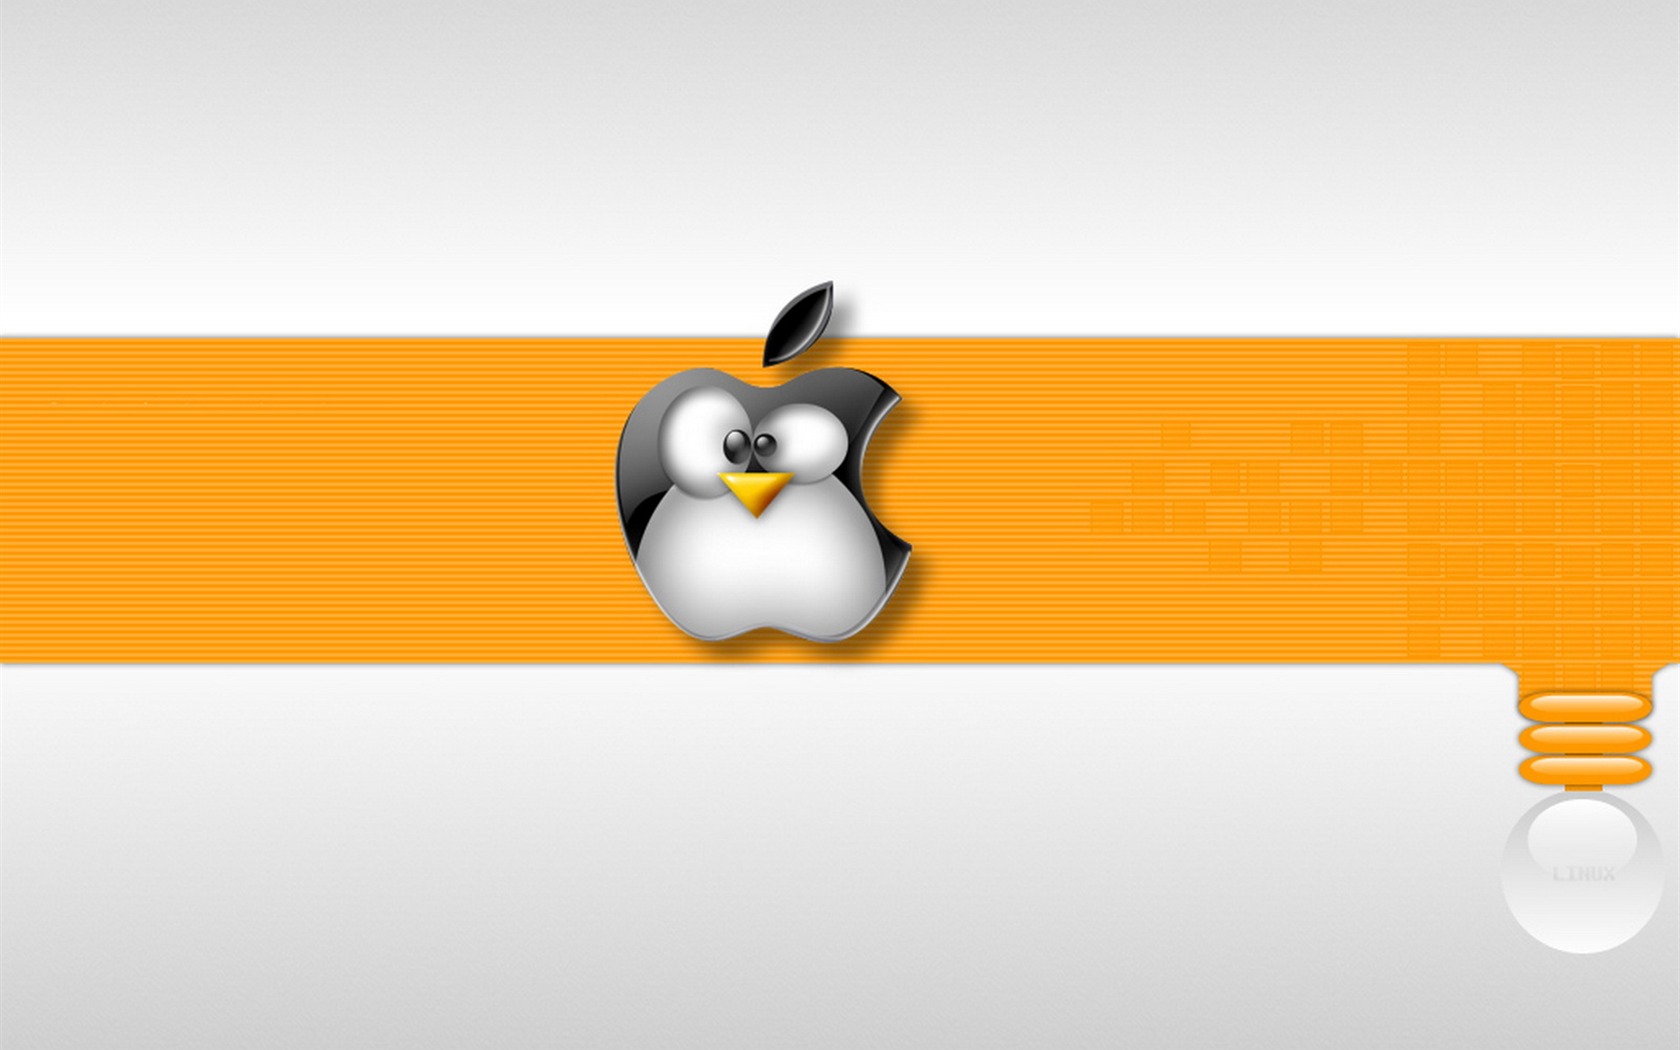 Linux tapety (2) #3 - 1680x1050